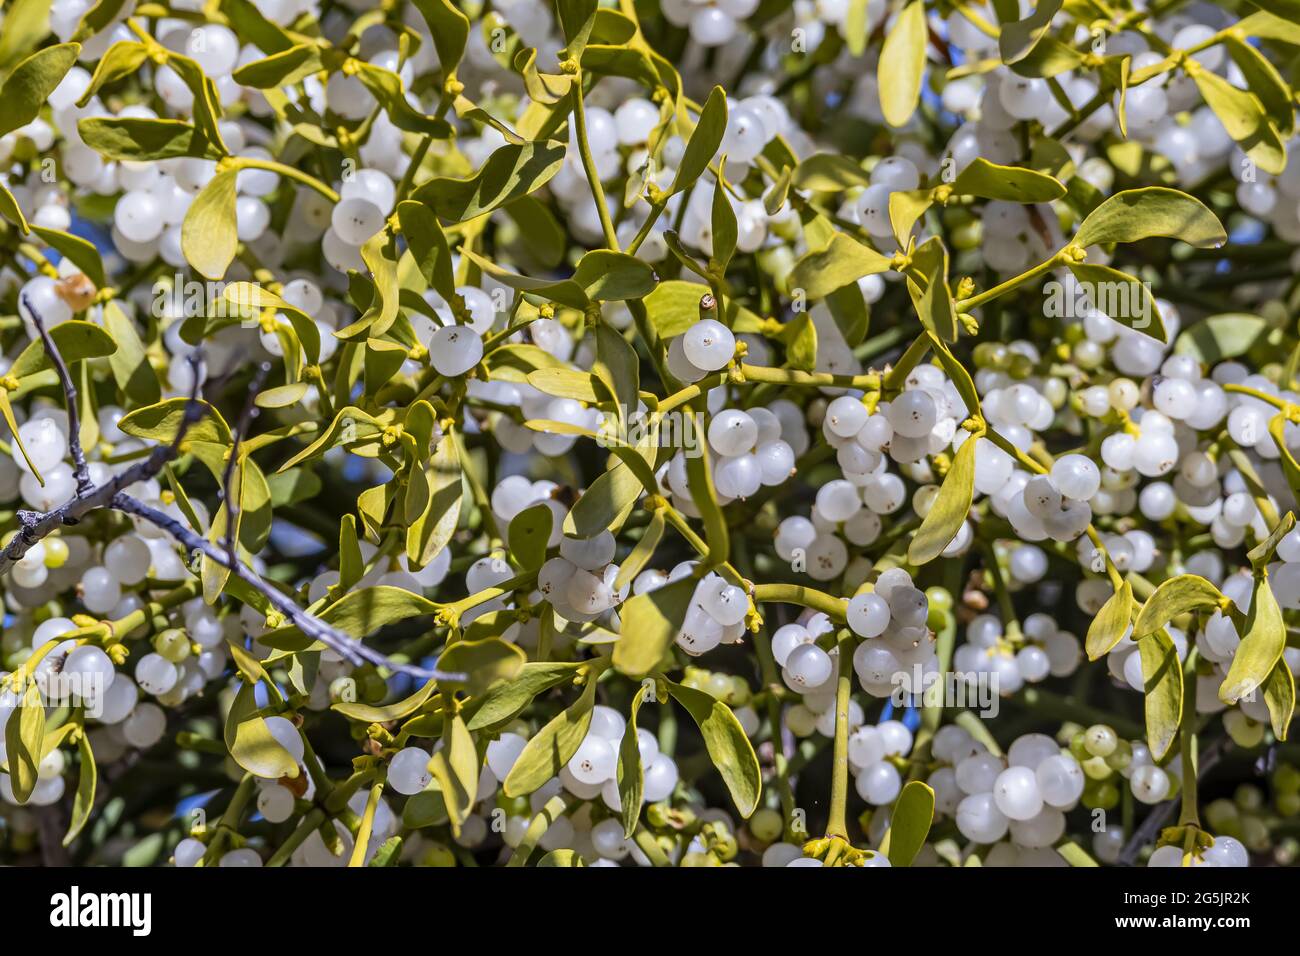 Closeup of Mistletoe branches with green leaves and white ripe berries Stock Photo